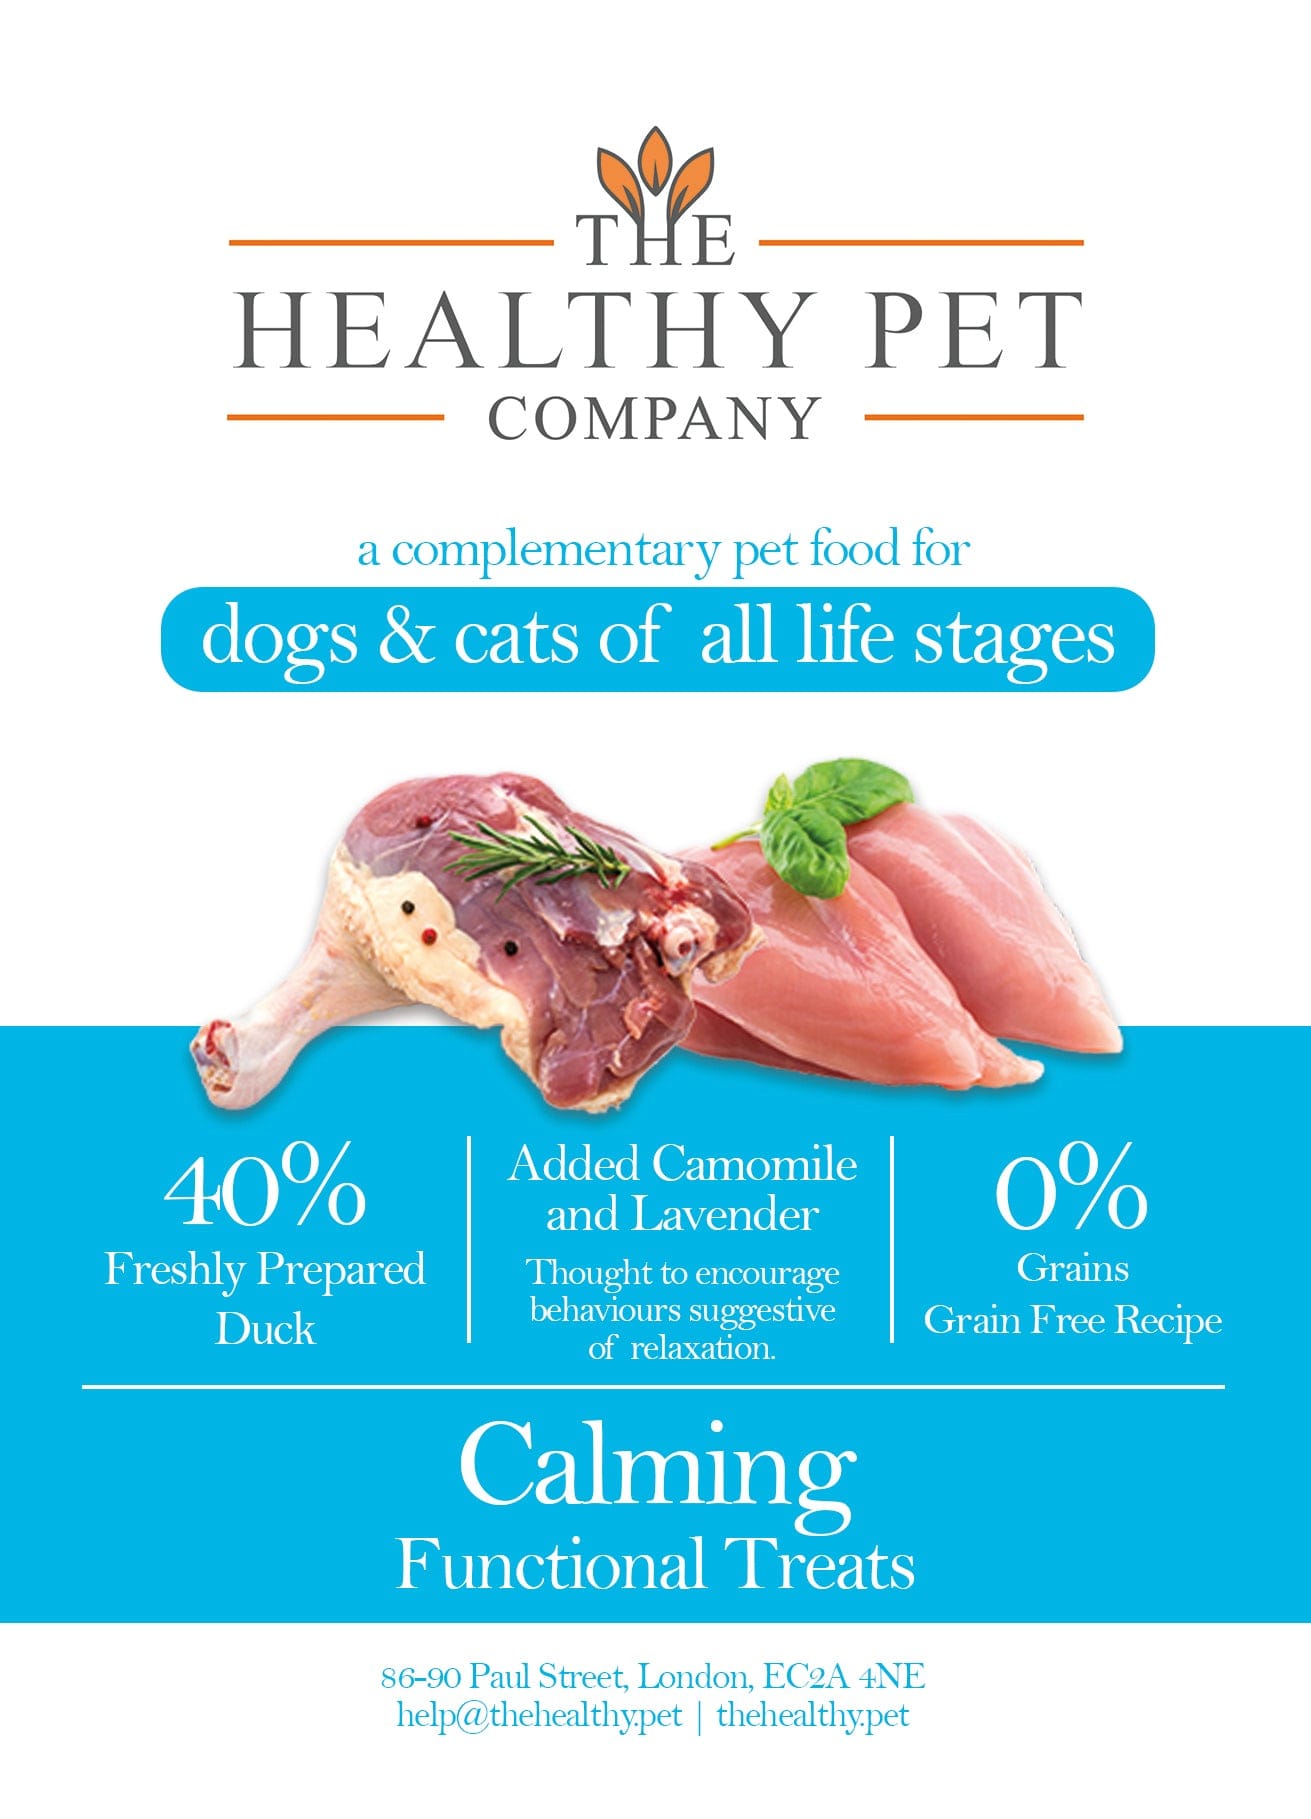 The Healthy Pet Company Relaxing & Calming Functional Treats - The Healthy Pet Company